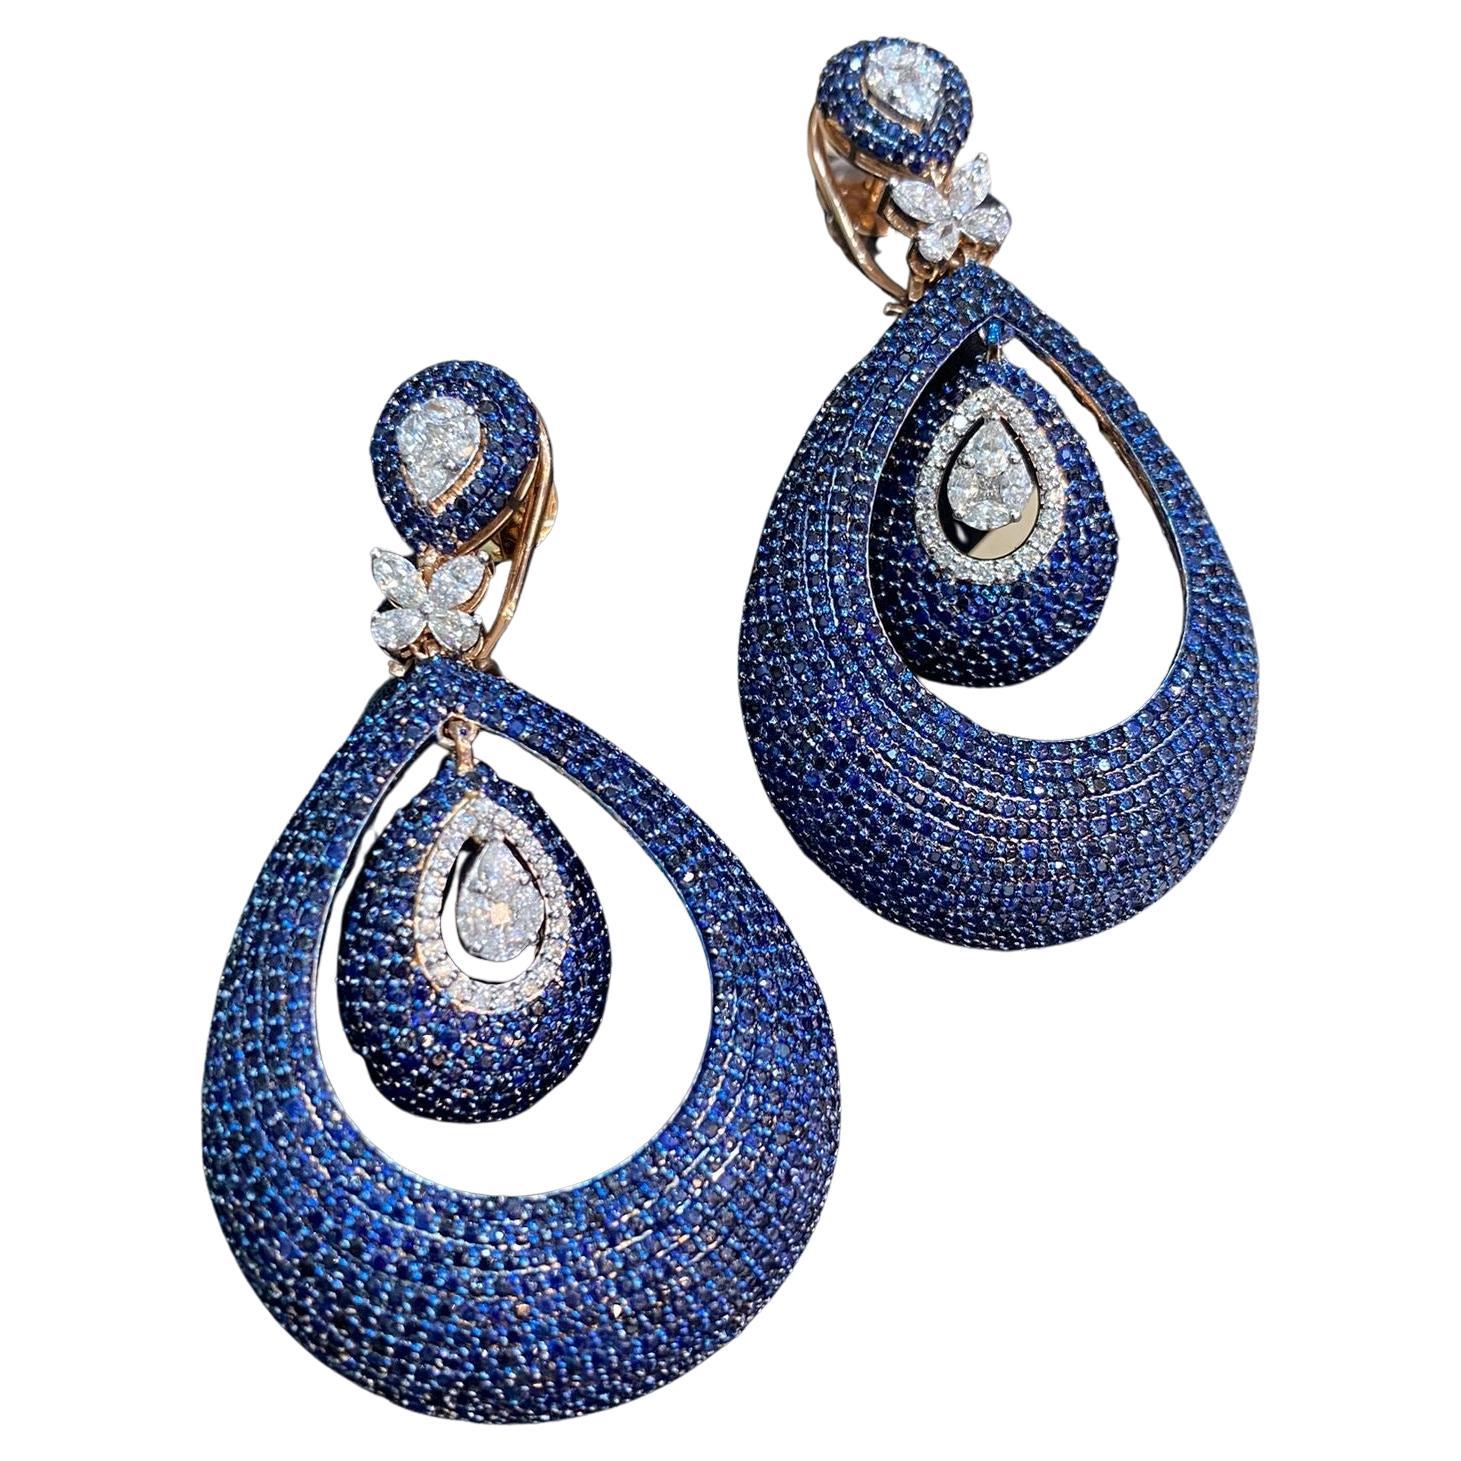 Stunning 20.30Cts Natural Blue Sapphire Marquise Pear Diamonds Earrings 14K Gold